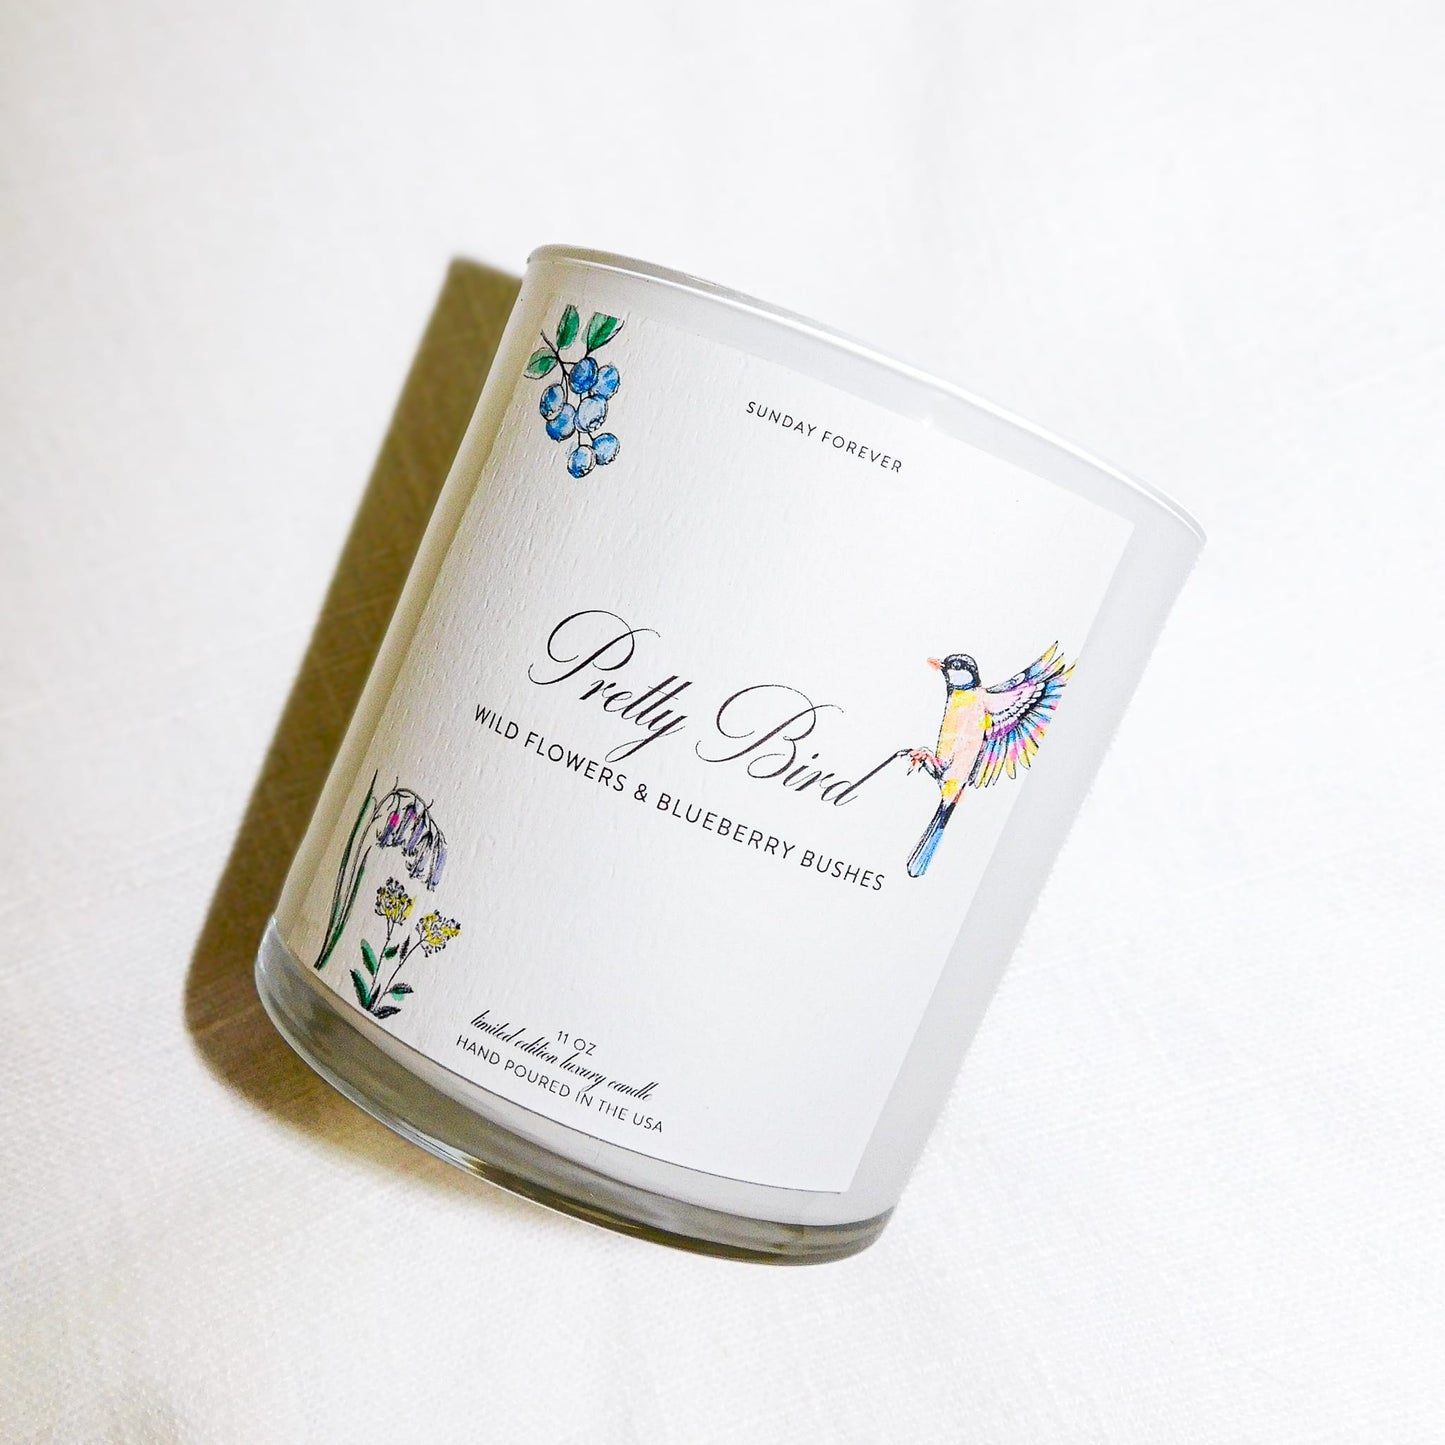 Limited Edition Pretty Bird Luxury Candle | Wild Flowers & Blueberry Bush| Sunday Forever